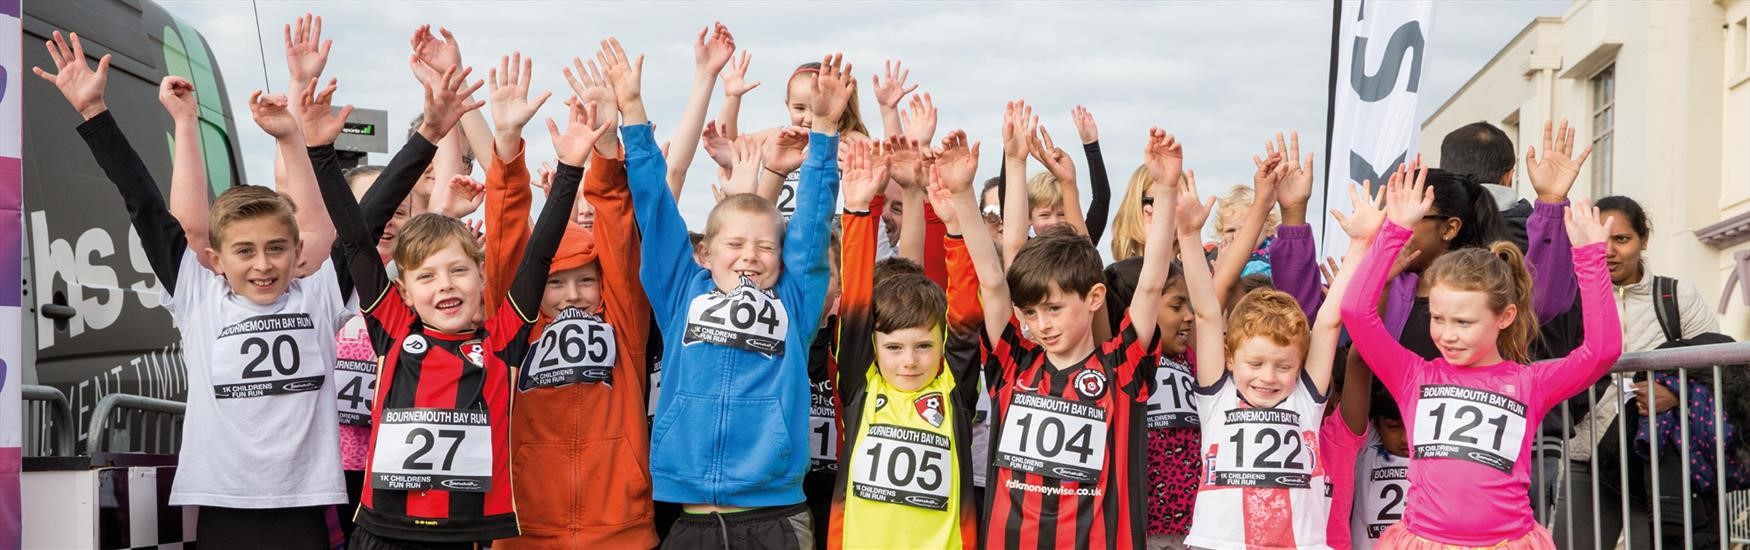 Kids excited to race in Bournemouths Bay Run 